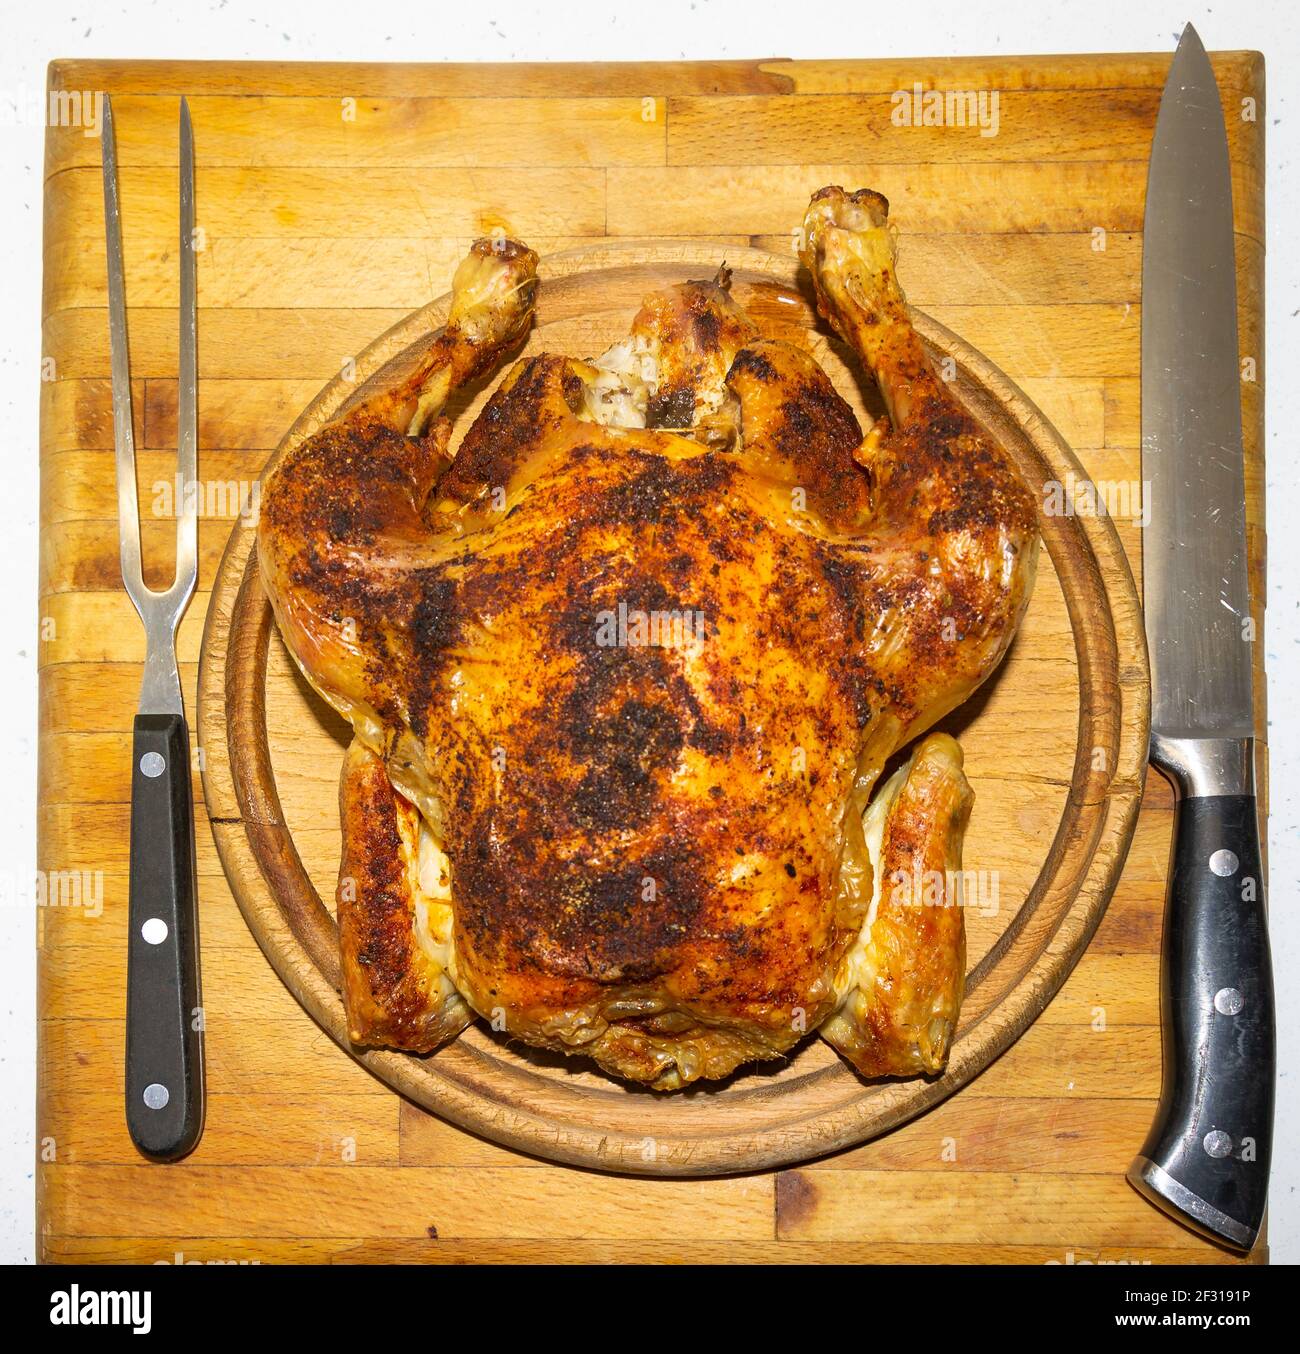 Roast chicken on carving board. Stock Photo